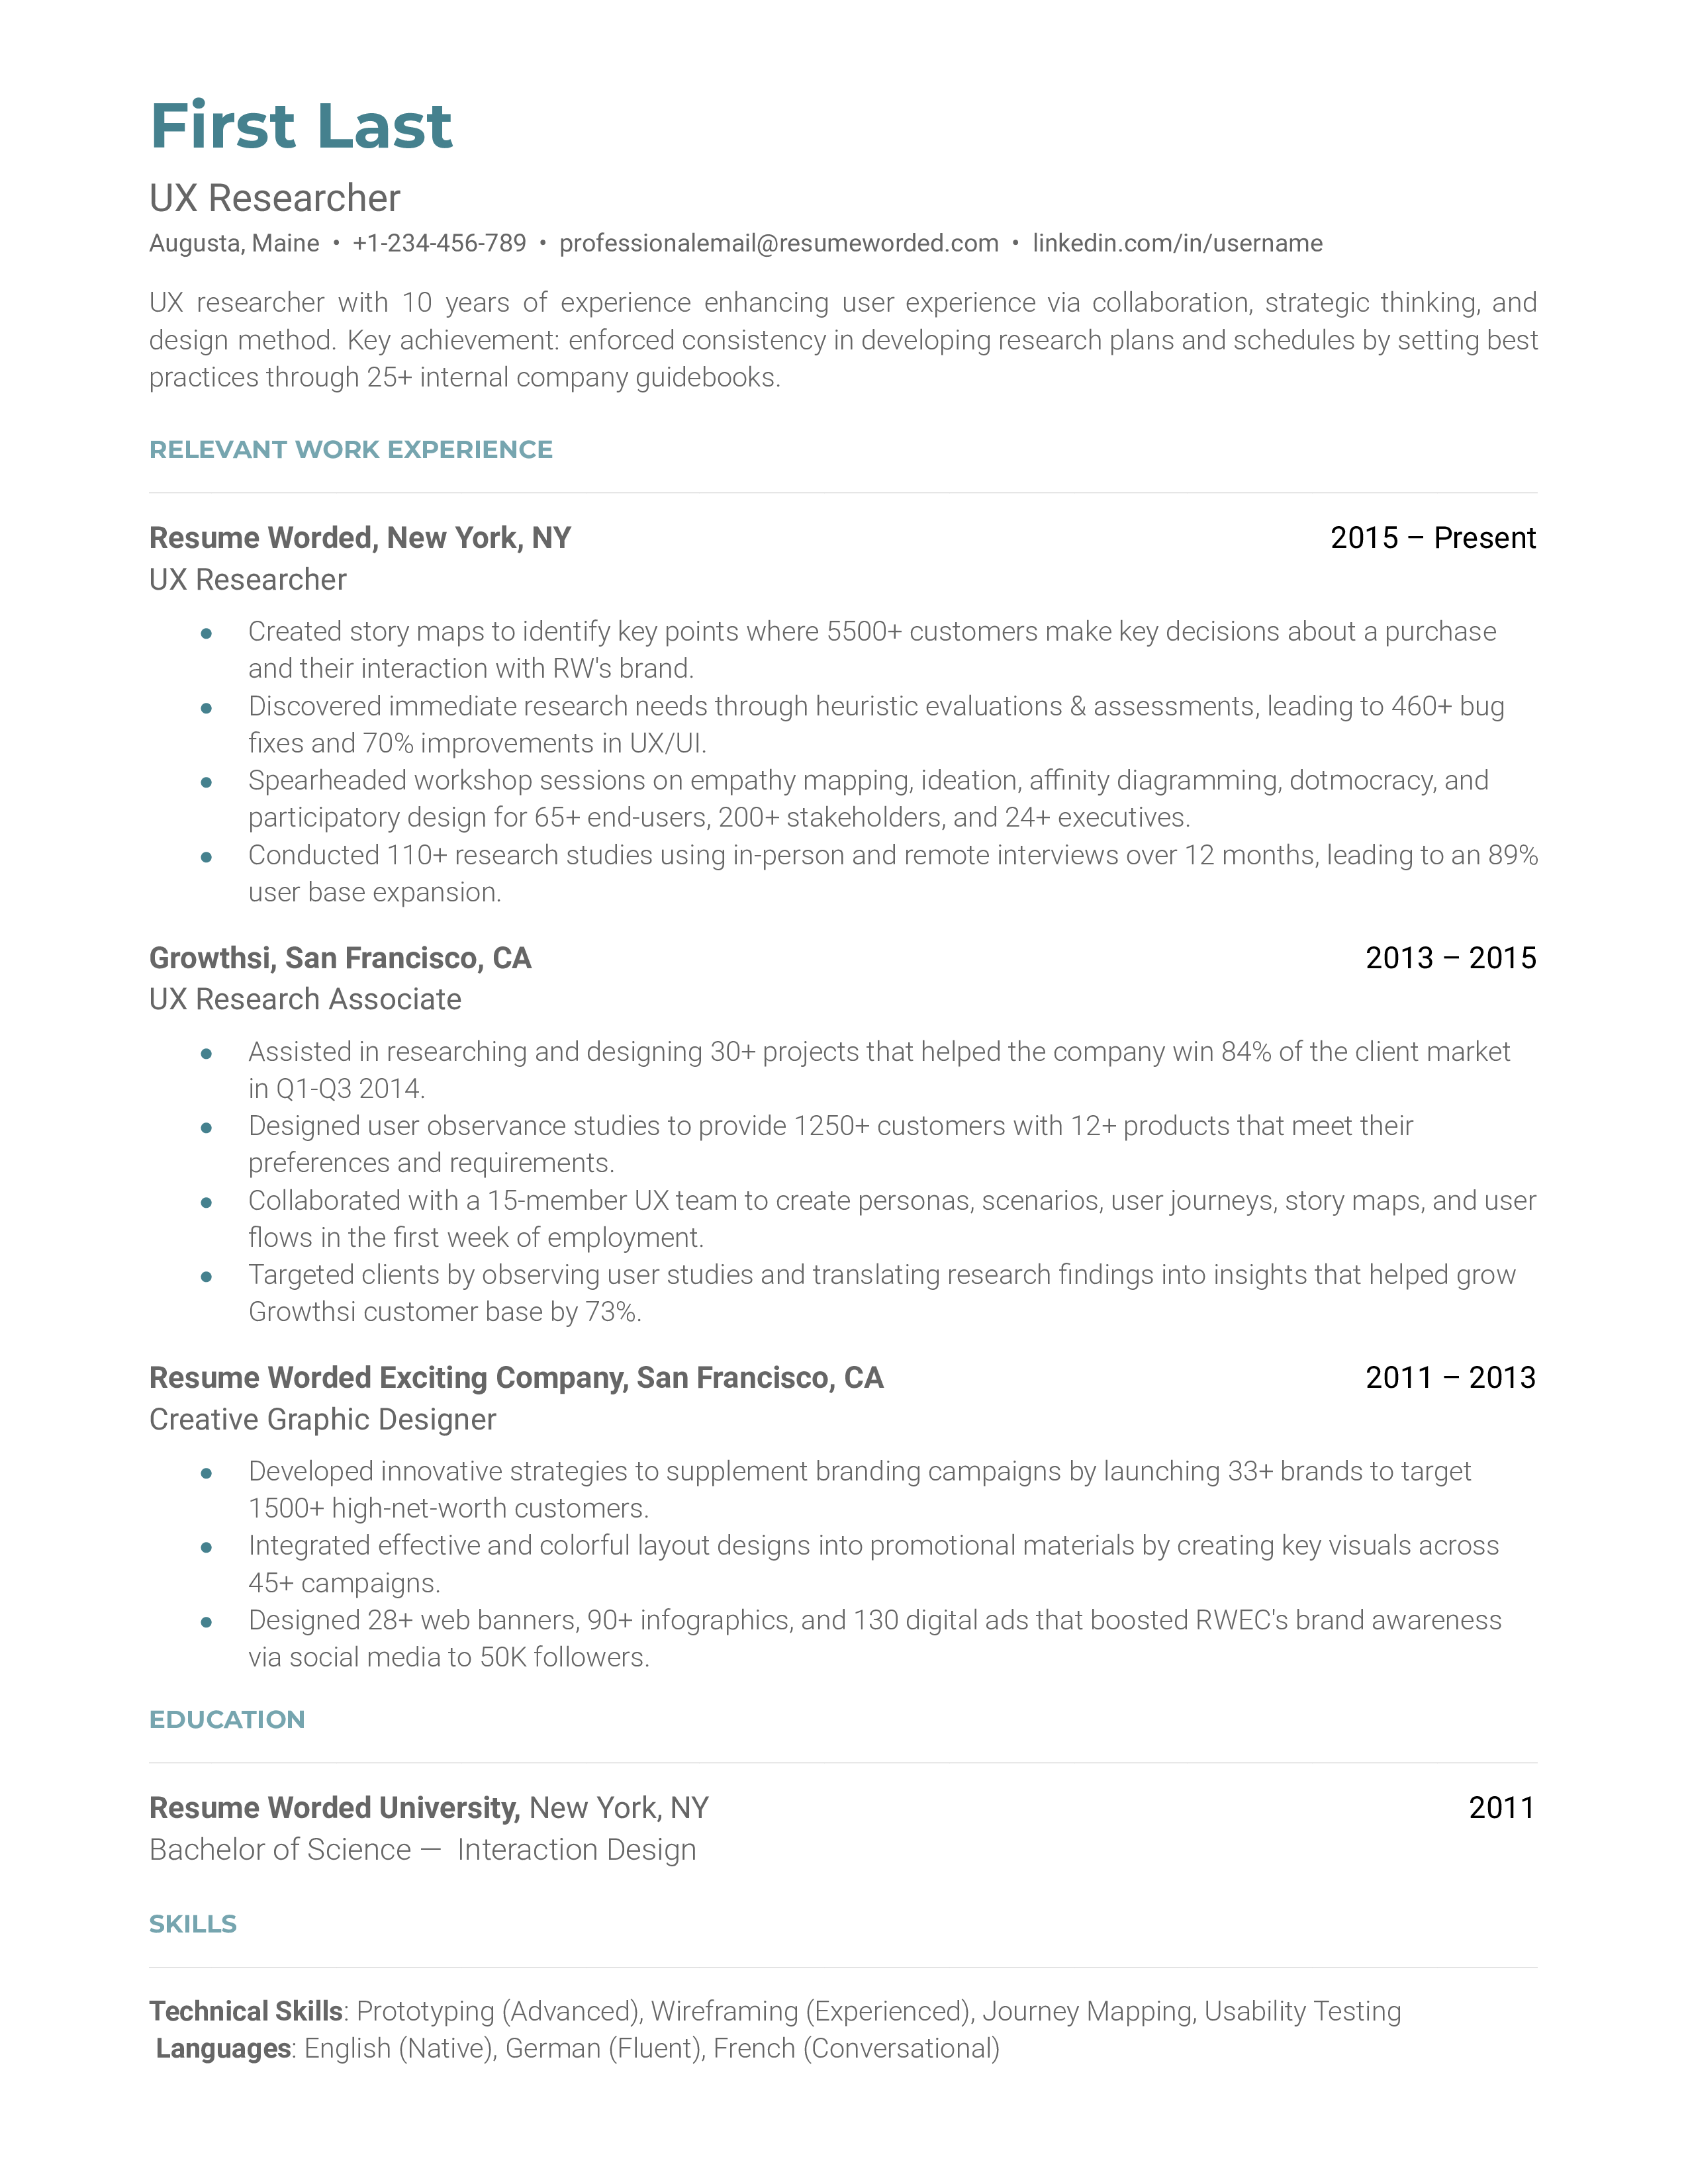 A UX Researcher resume template that highlights technical skills.